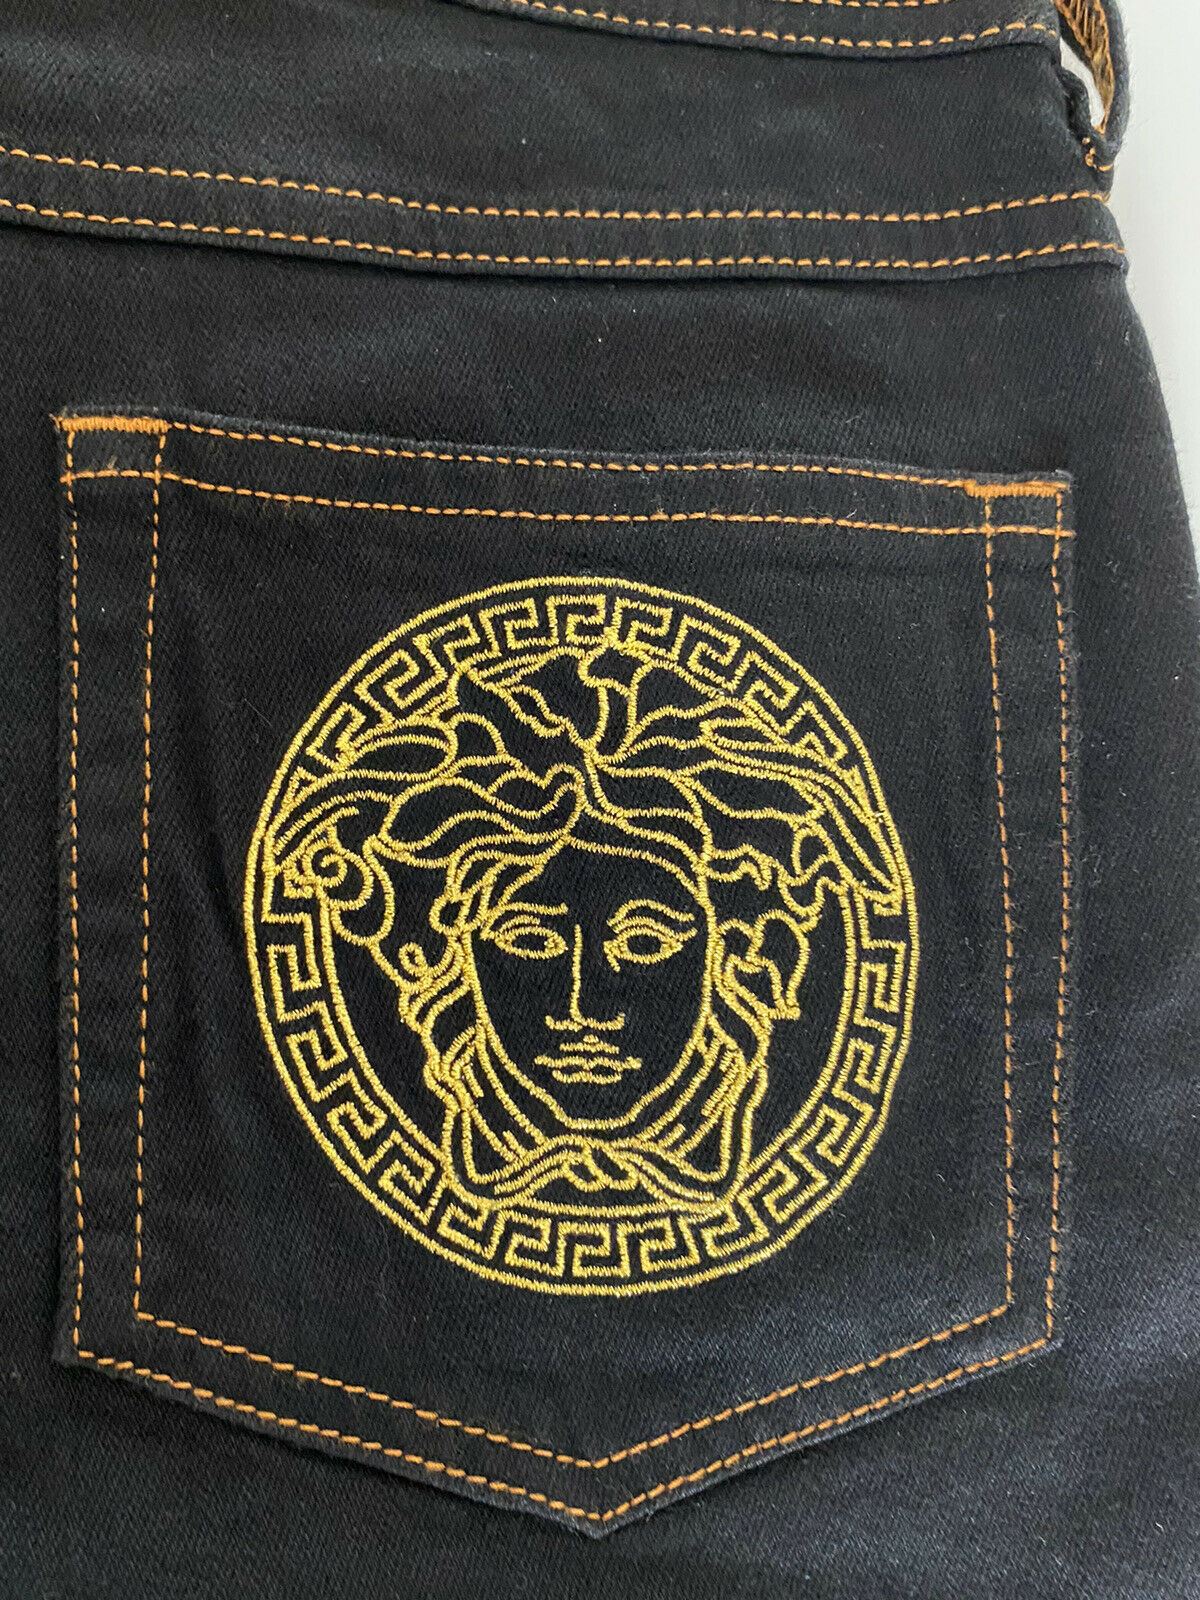 NWT $500 Versace Women's Denim Black Jeans Size 26 US A89556S Made in Italy